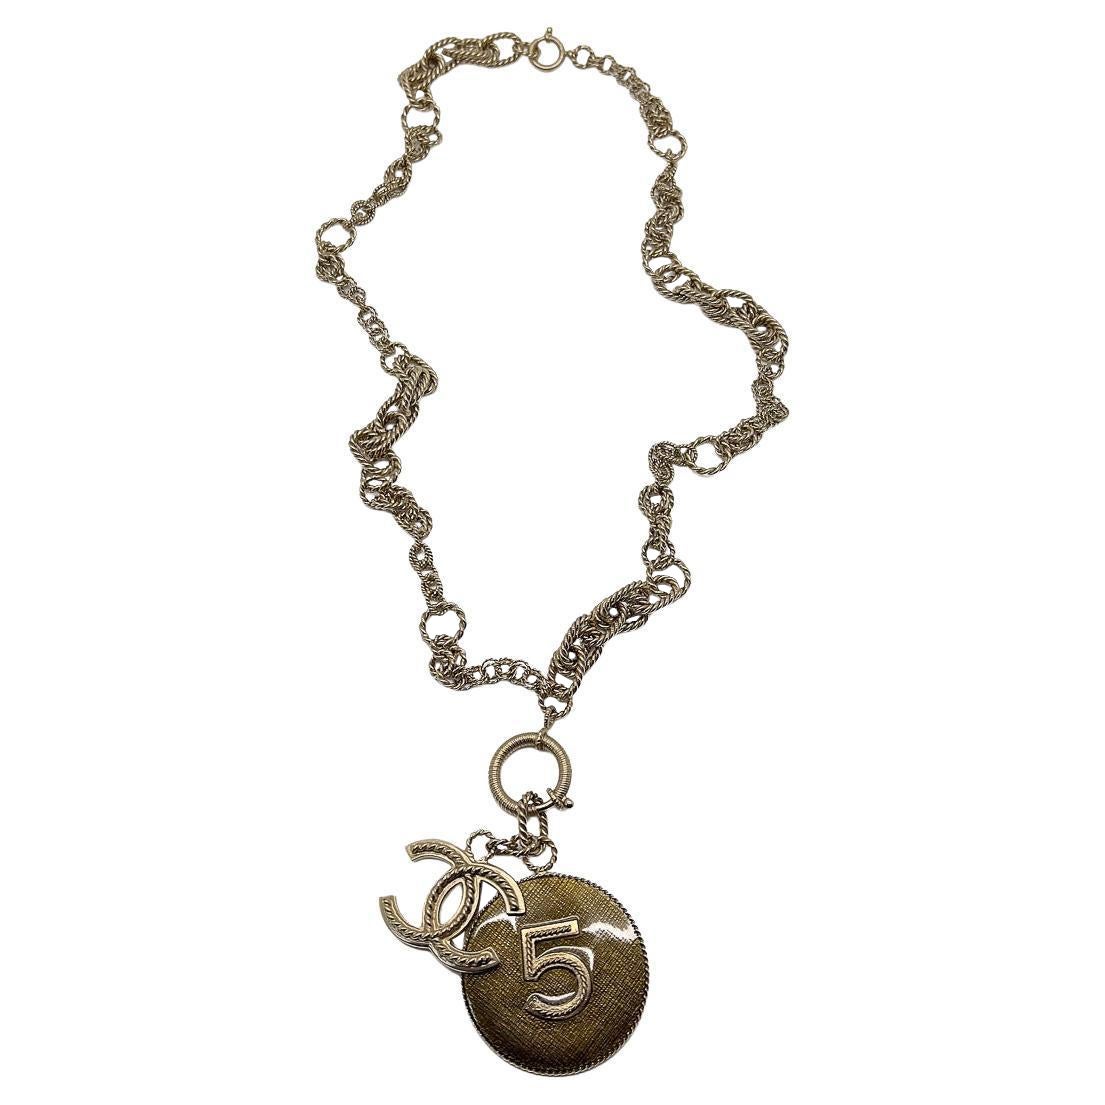 Vintage Chanel Statement No. 5 Rope Chain Charm Necklace 2013 For Sale